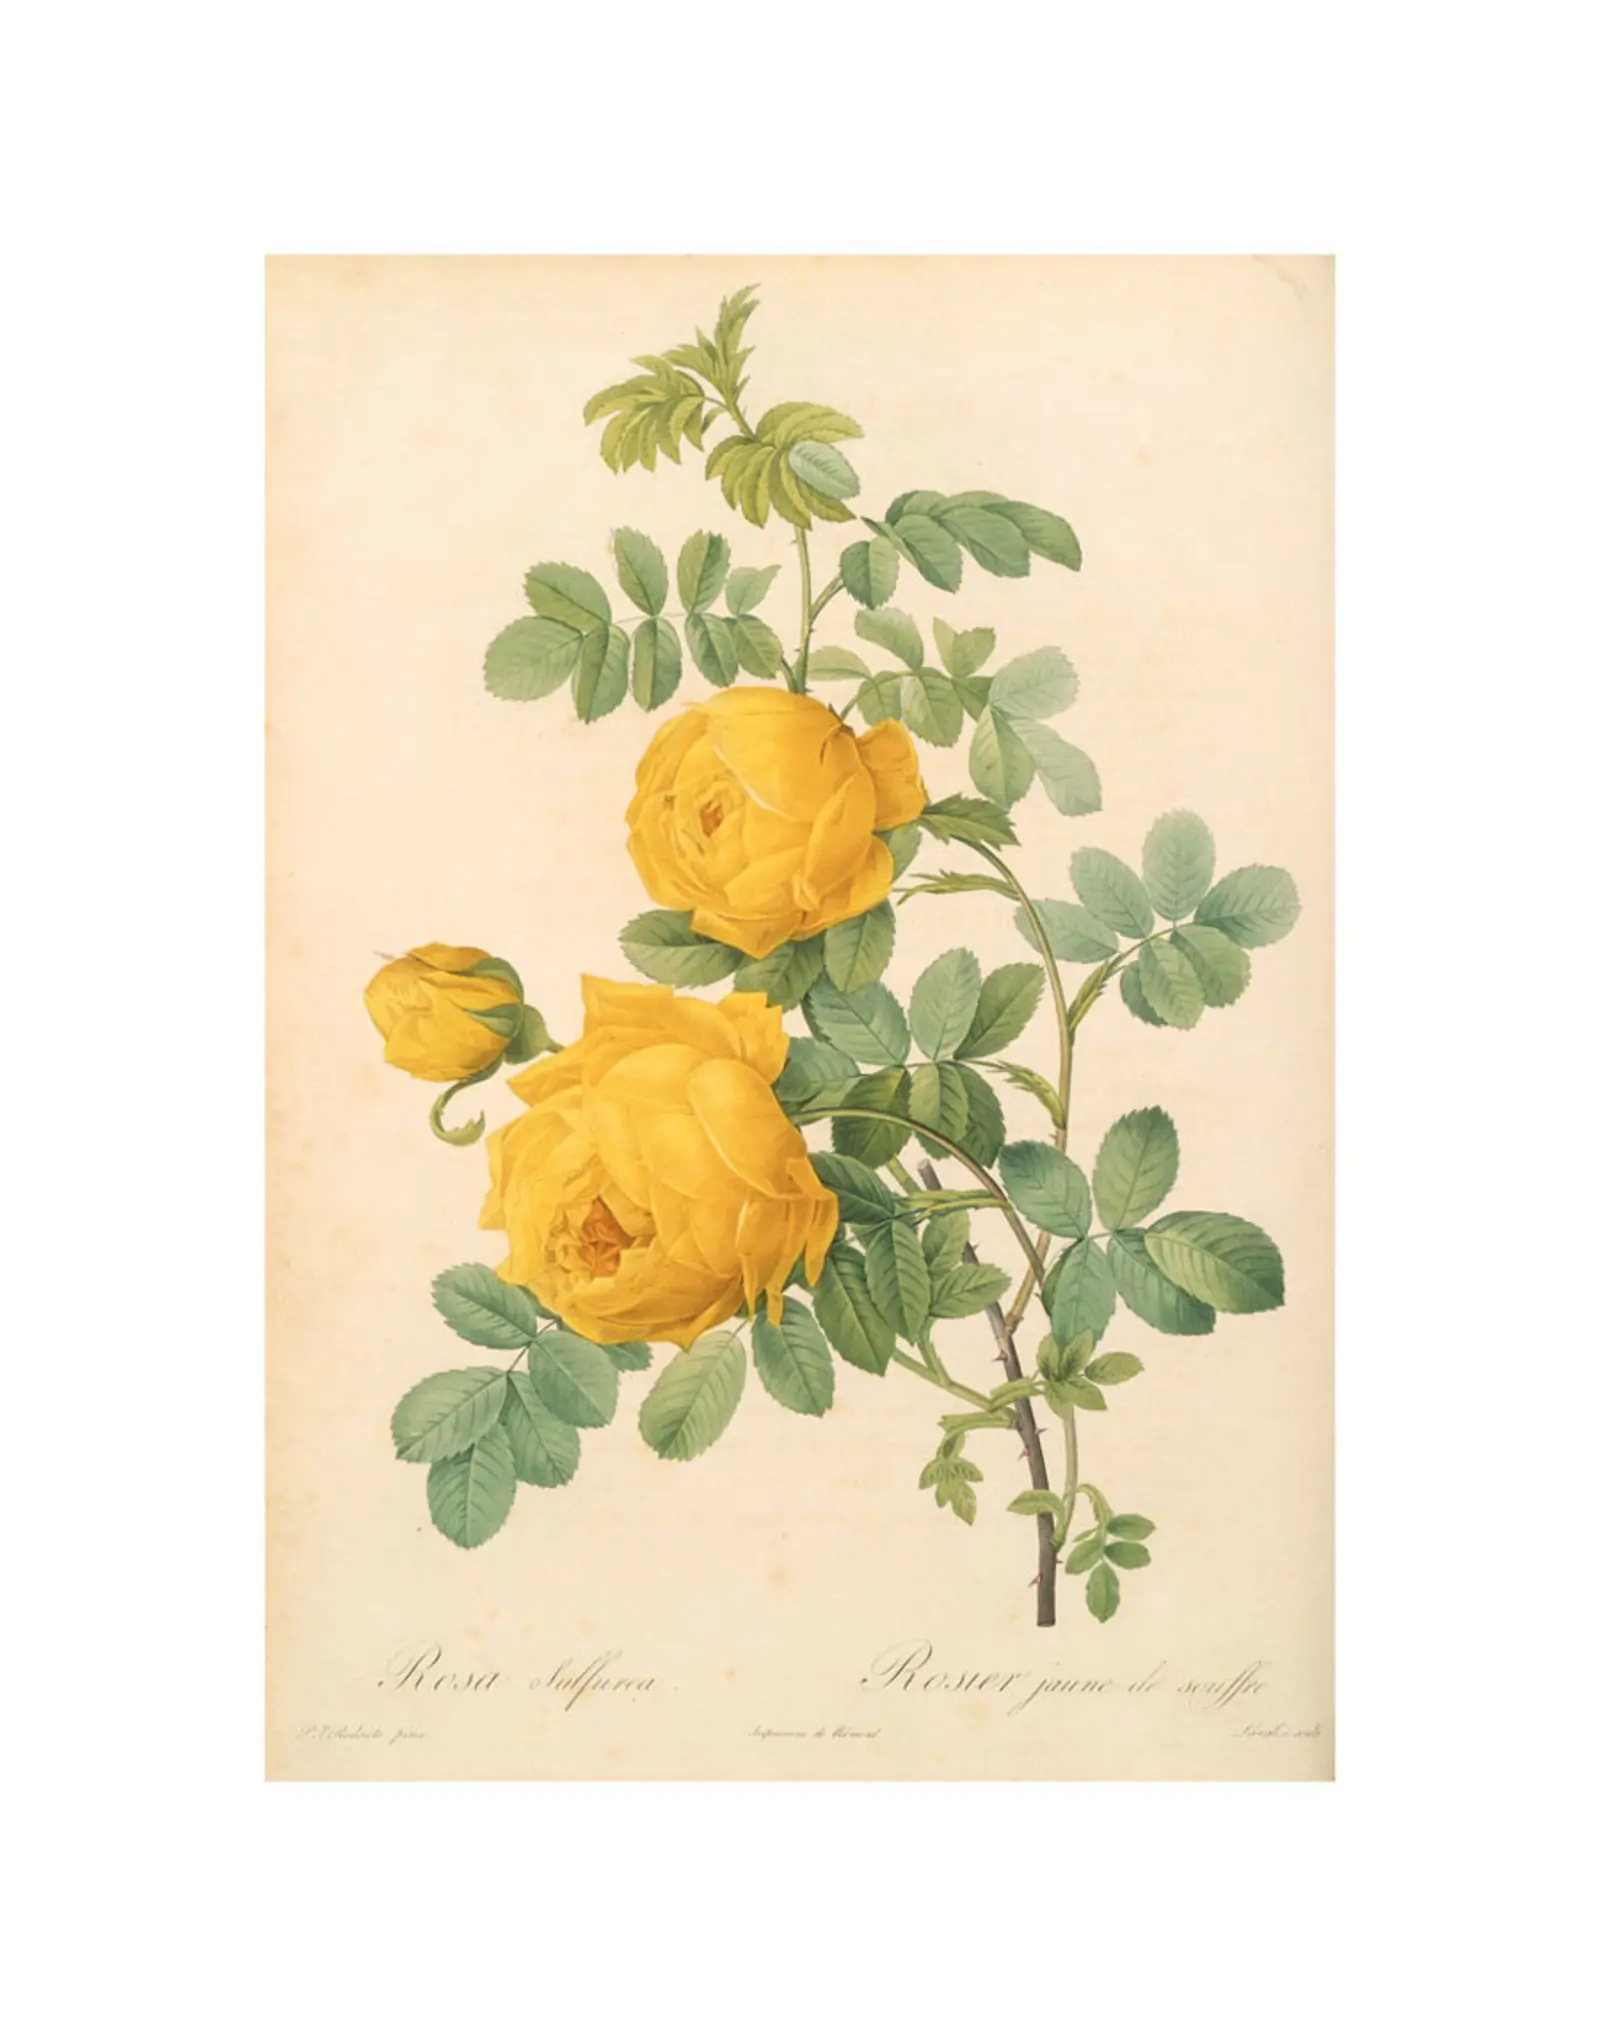 A botanical illustration of a blooming yellow rose with green foliage.